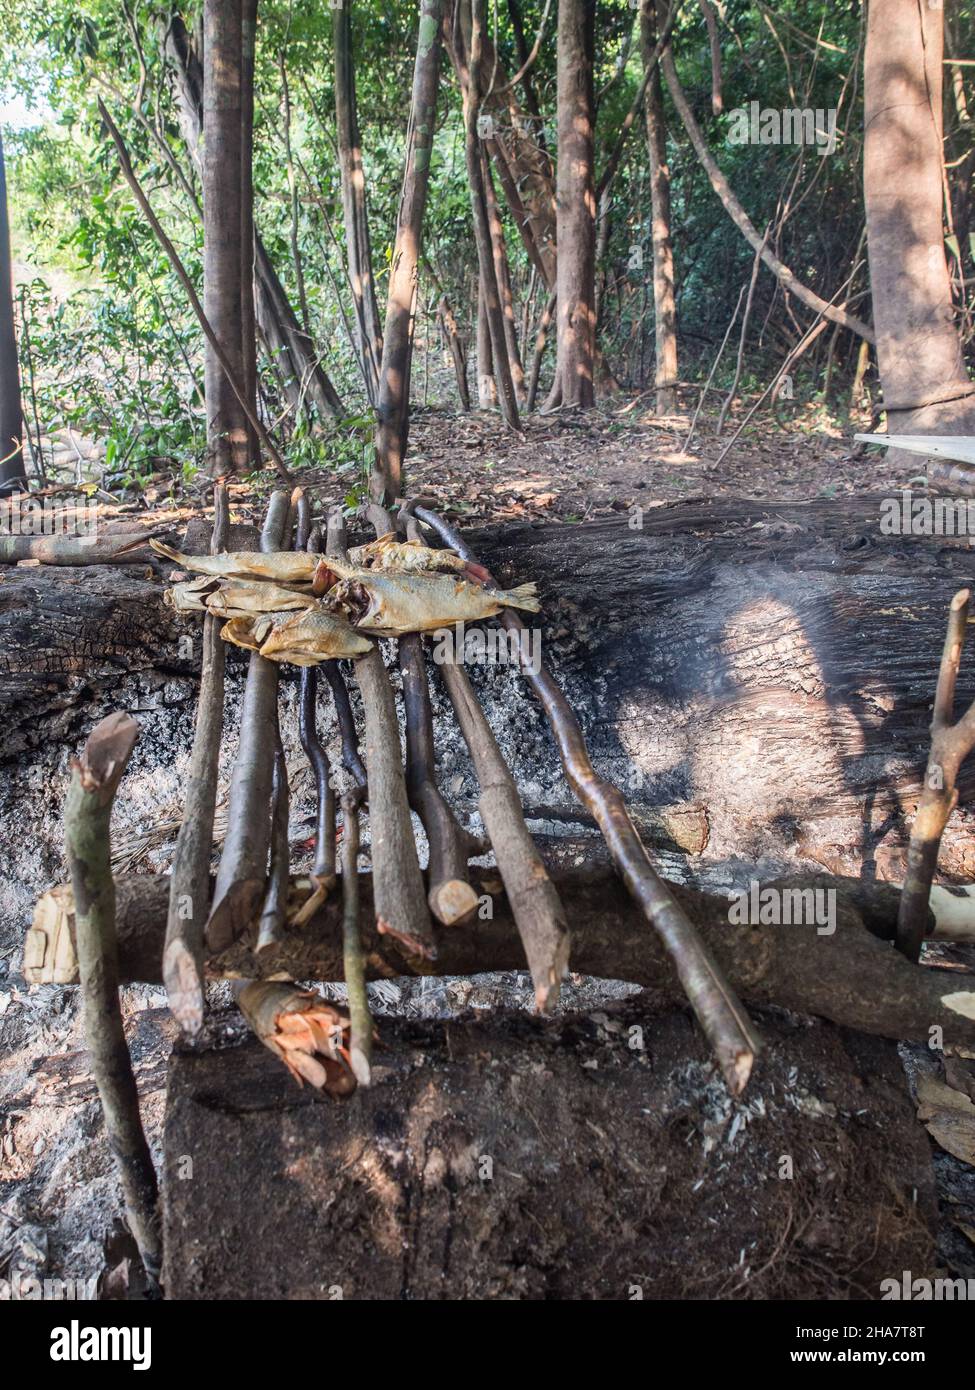 Lagoon, Brazil .Grilling fish a fireplece on the camp in the amazons jungle. Amazonia. Latin America. Stock Photo